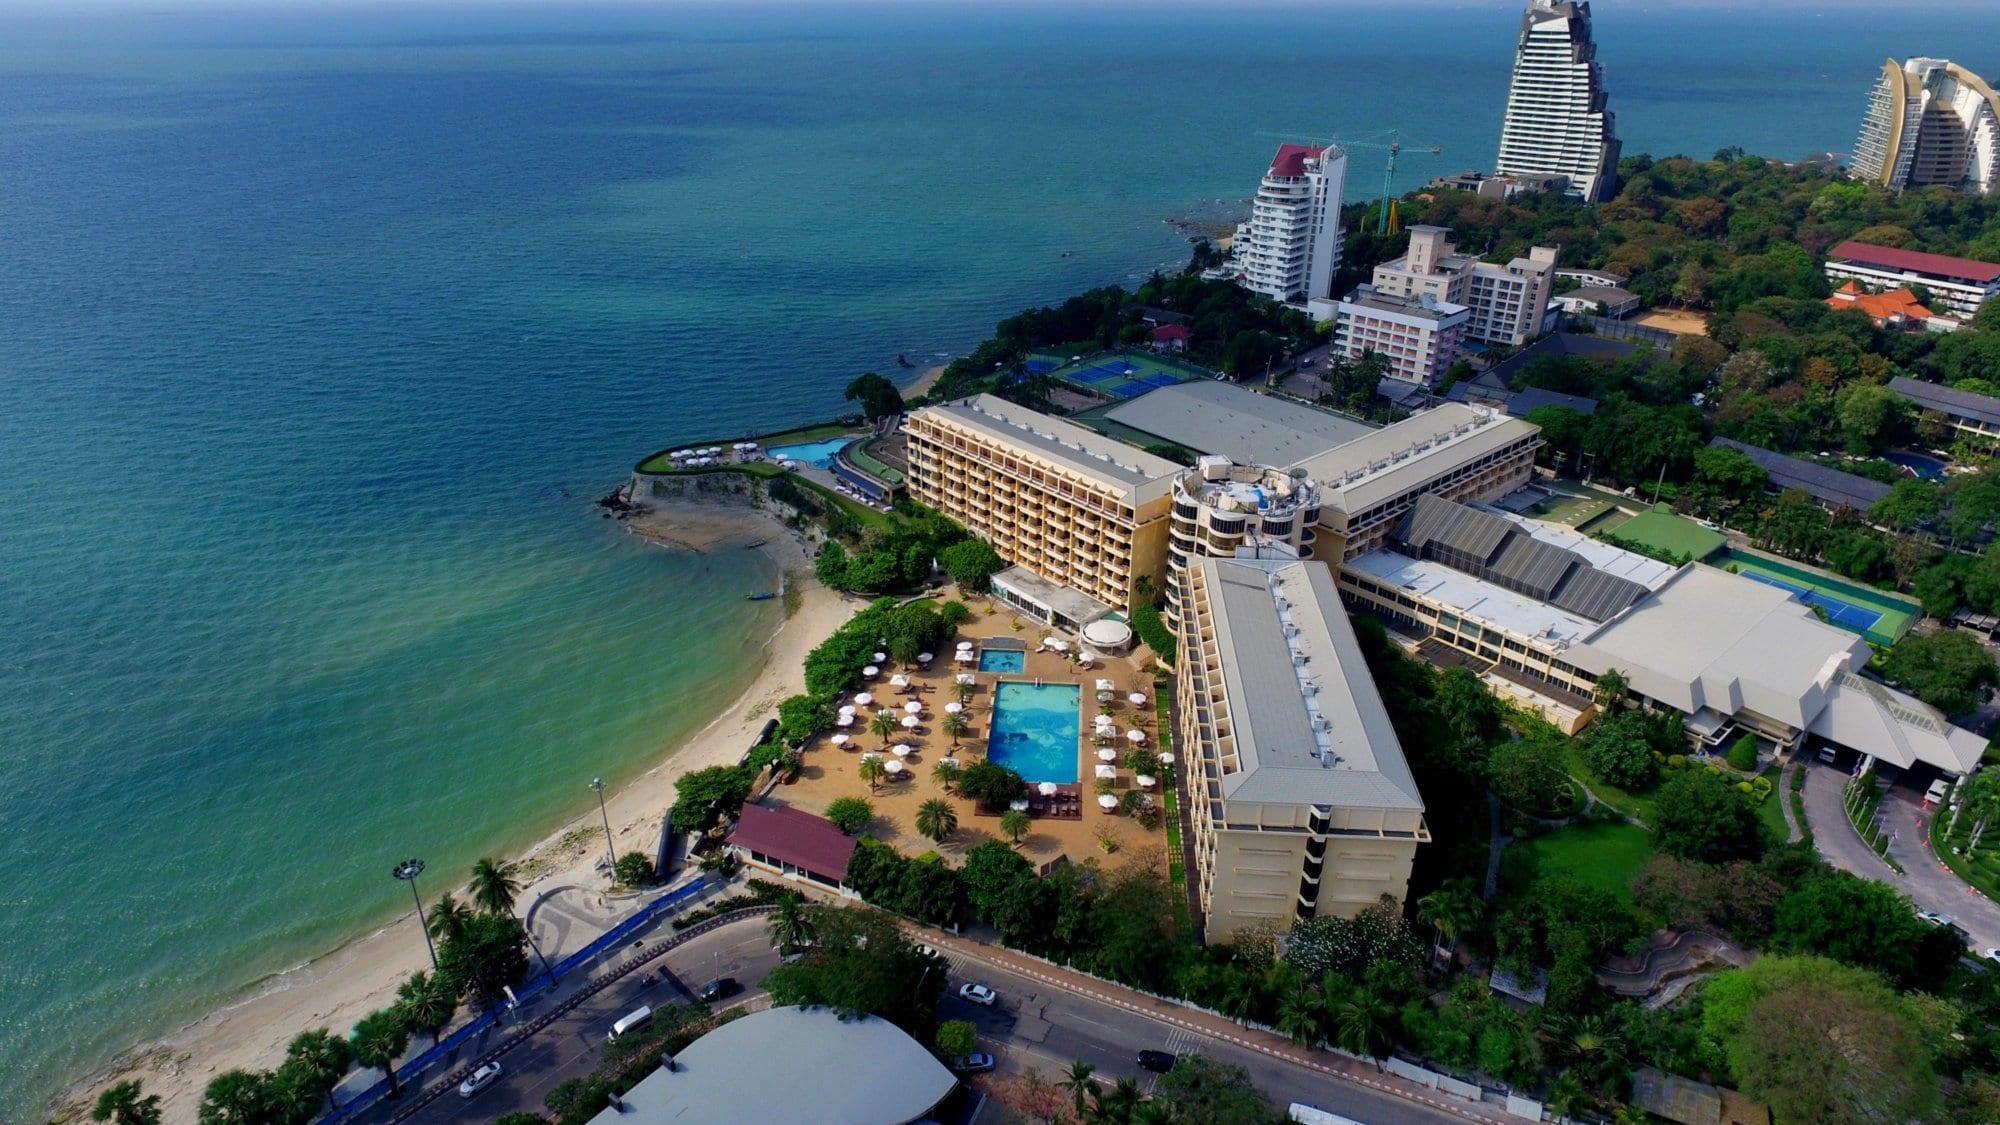 View Dusit Thani Hotel's lovely sea view in astounding Pattaya.